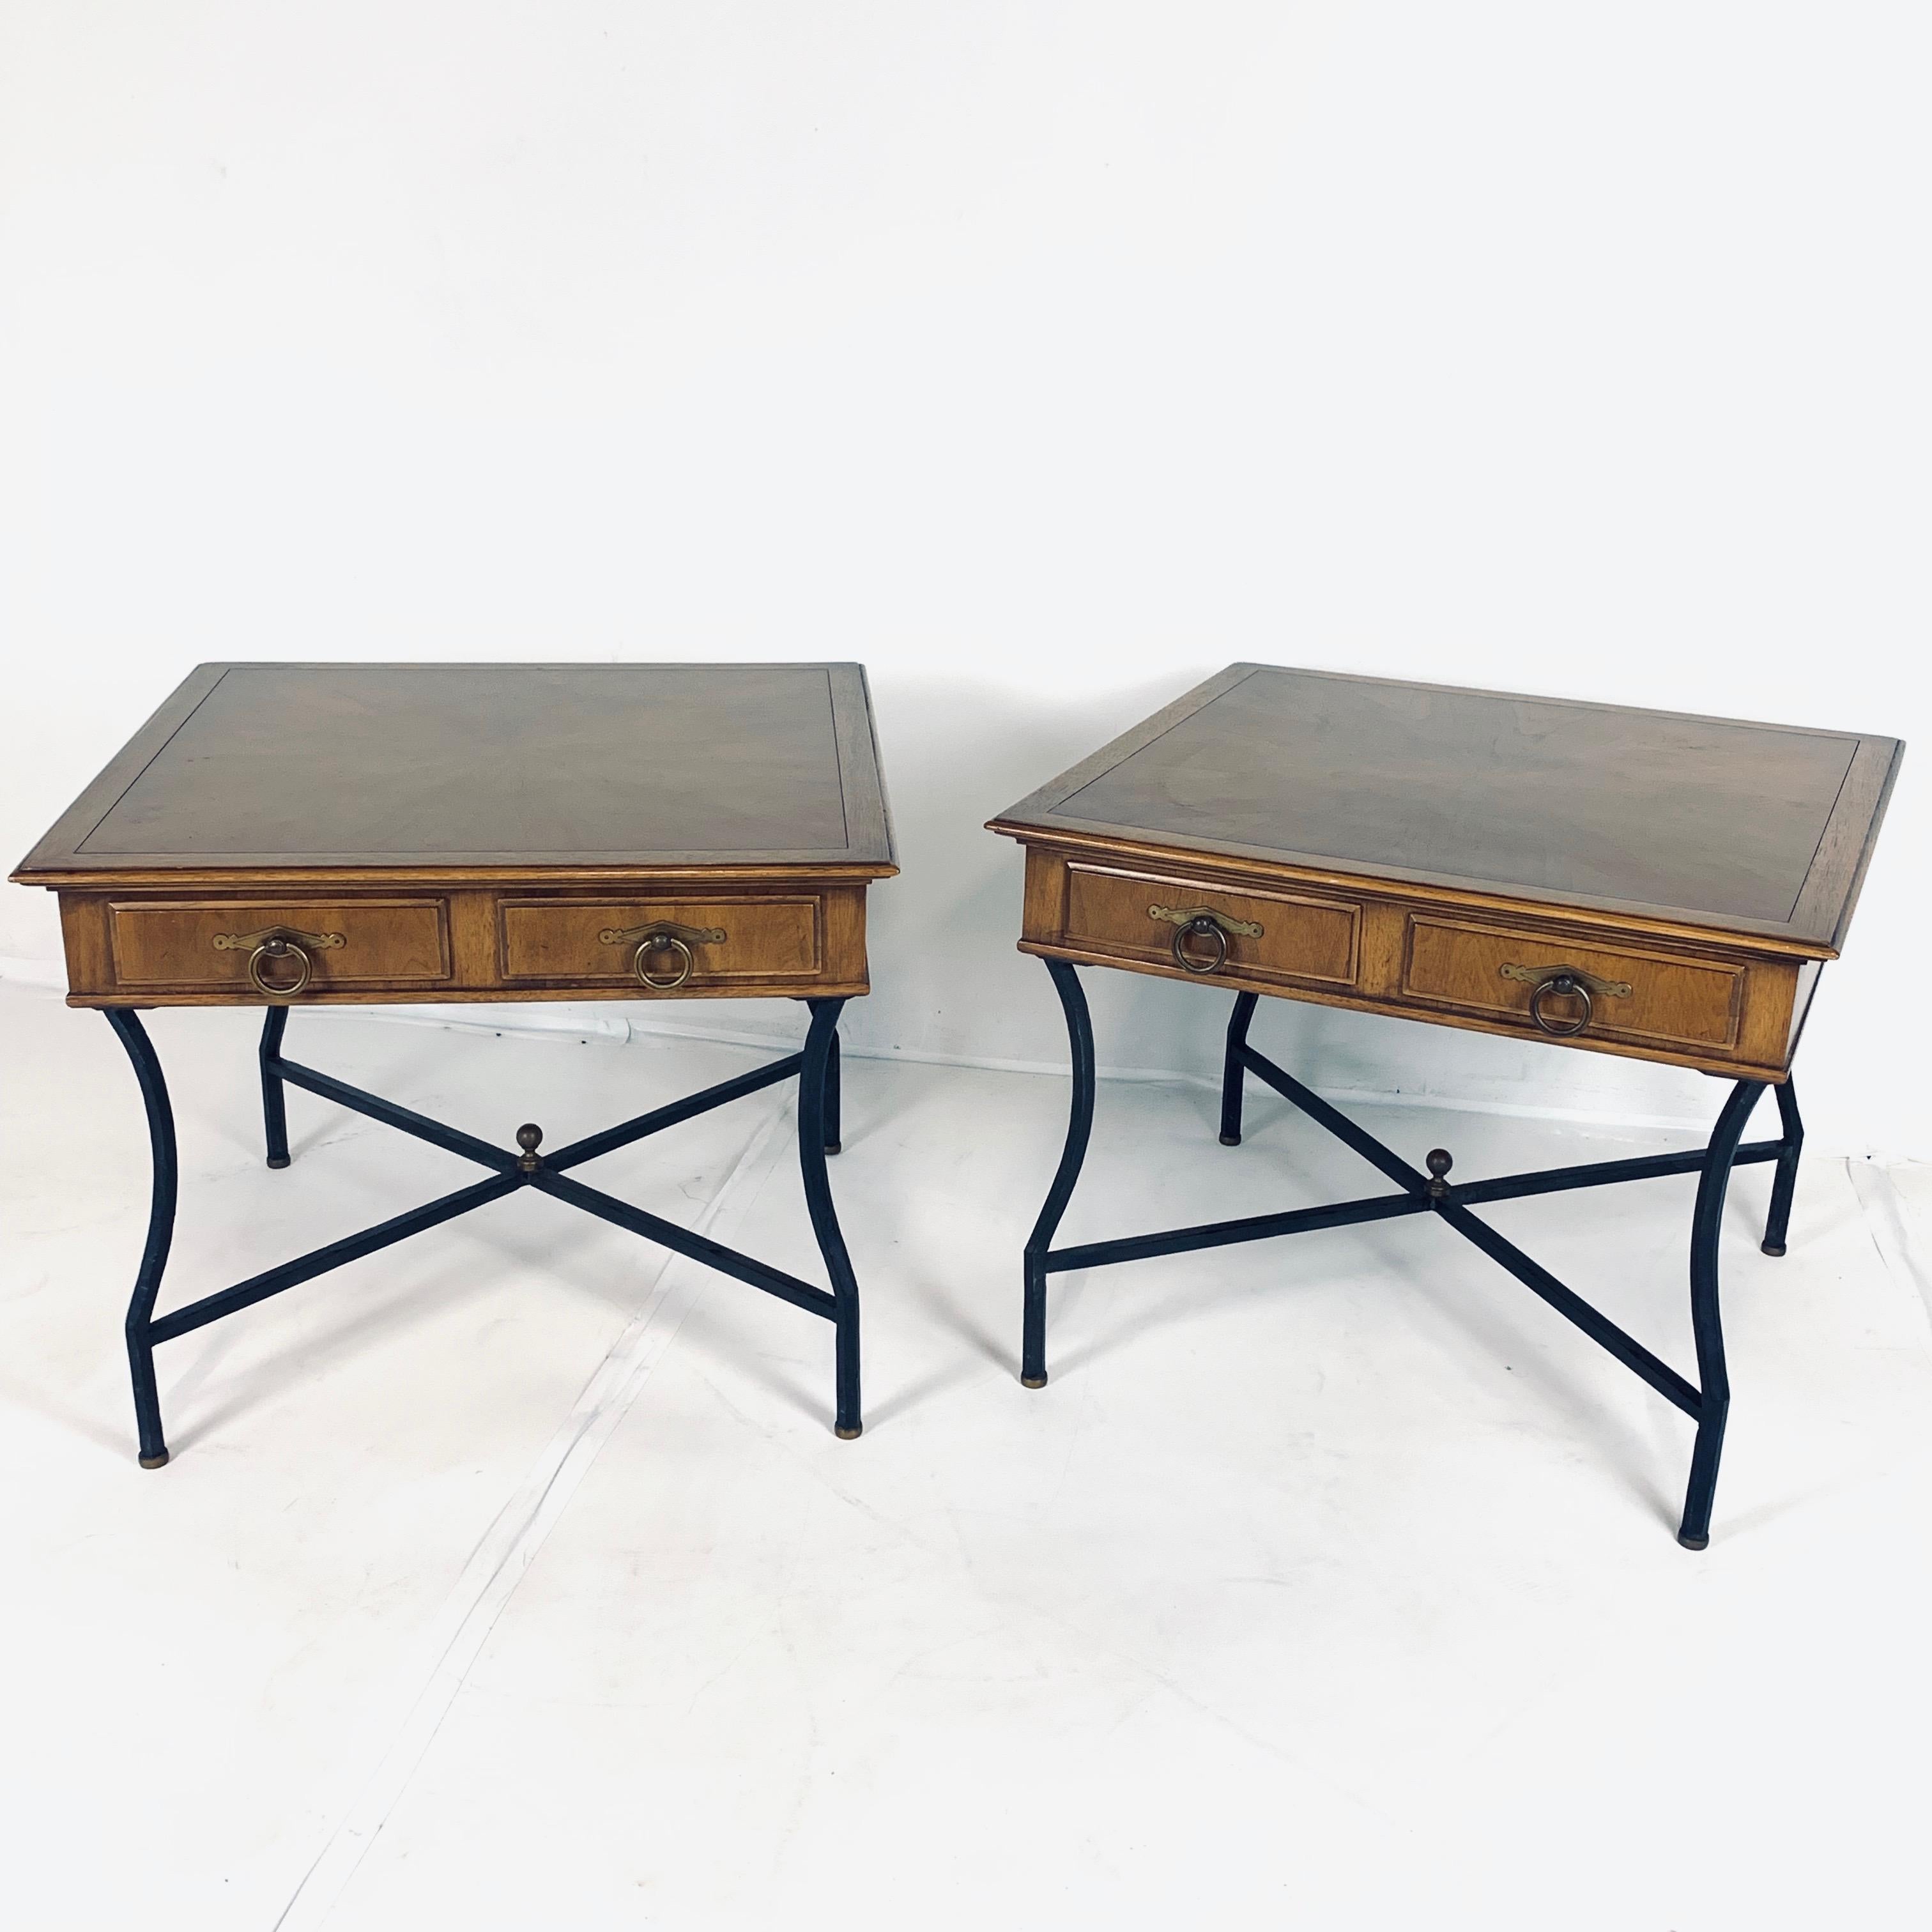 Amazing pair of Tomlinson End Tables. Walnut case top with 2 drawers. Decorative wrought iron base with brass detailing. The attention to detail on these tables is absolutely stunning!
Comes with original paperwork.

27 x 27  x 21.5 